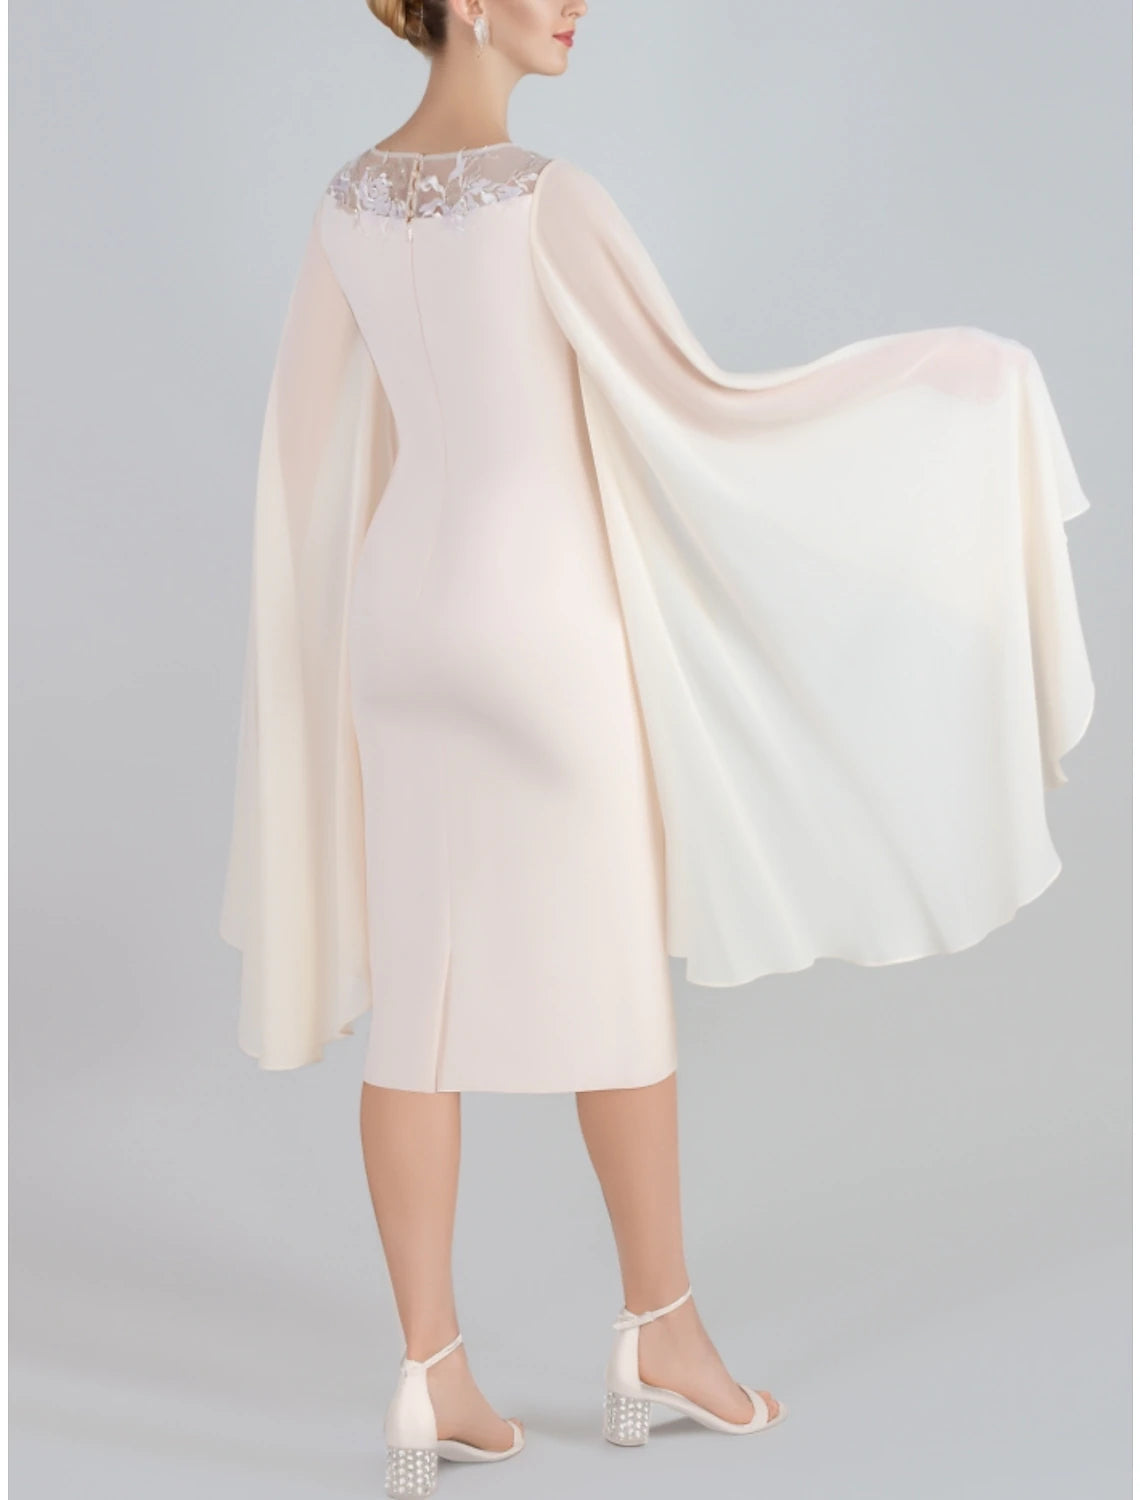 Sheath / Column Mother of the Bride Dress Wedding Guest Elegant Petite Scoop Neck Tea Length Chiffon Lace Long Sleeve with Split Front Ruching Solid Color